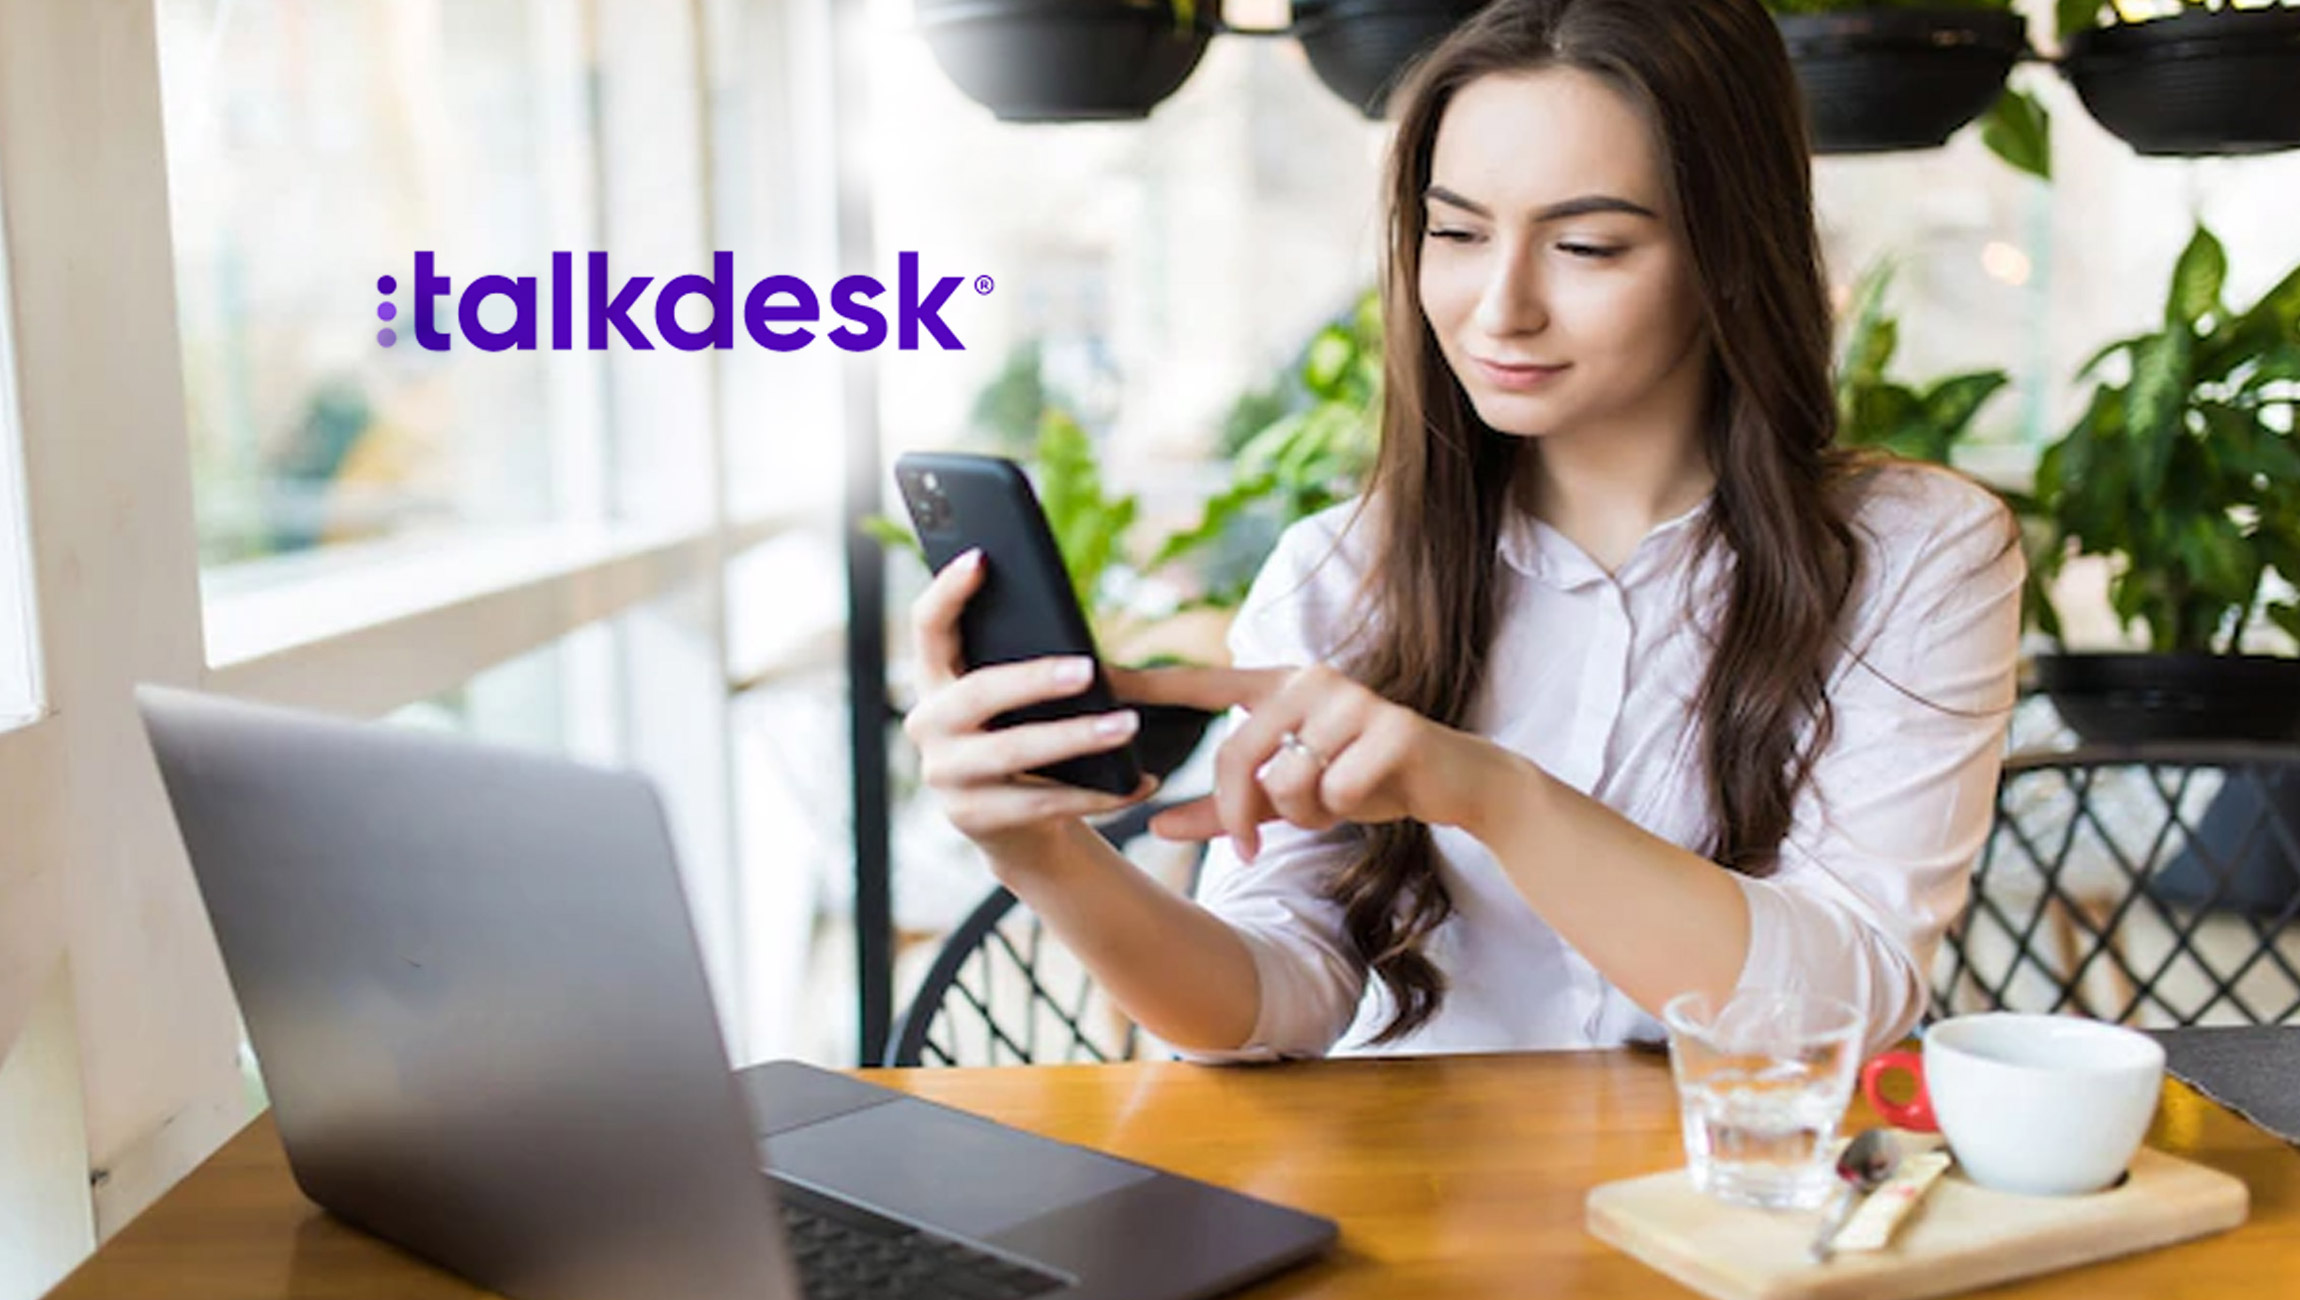 New Talkdesk Research Reveals Key Investment Areas for Improving Insurance CX